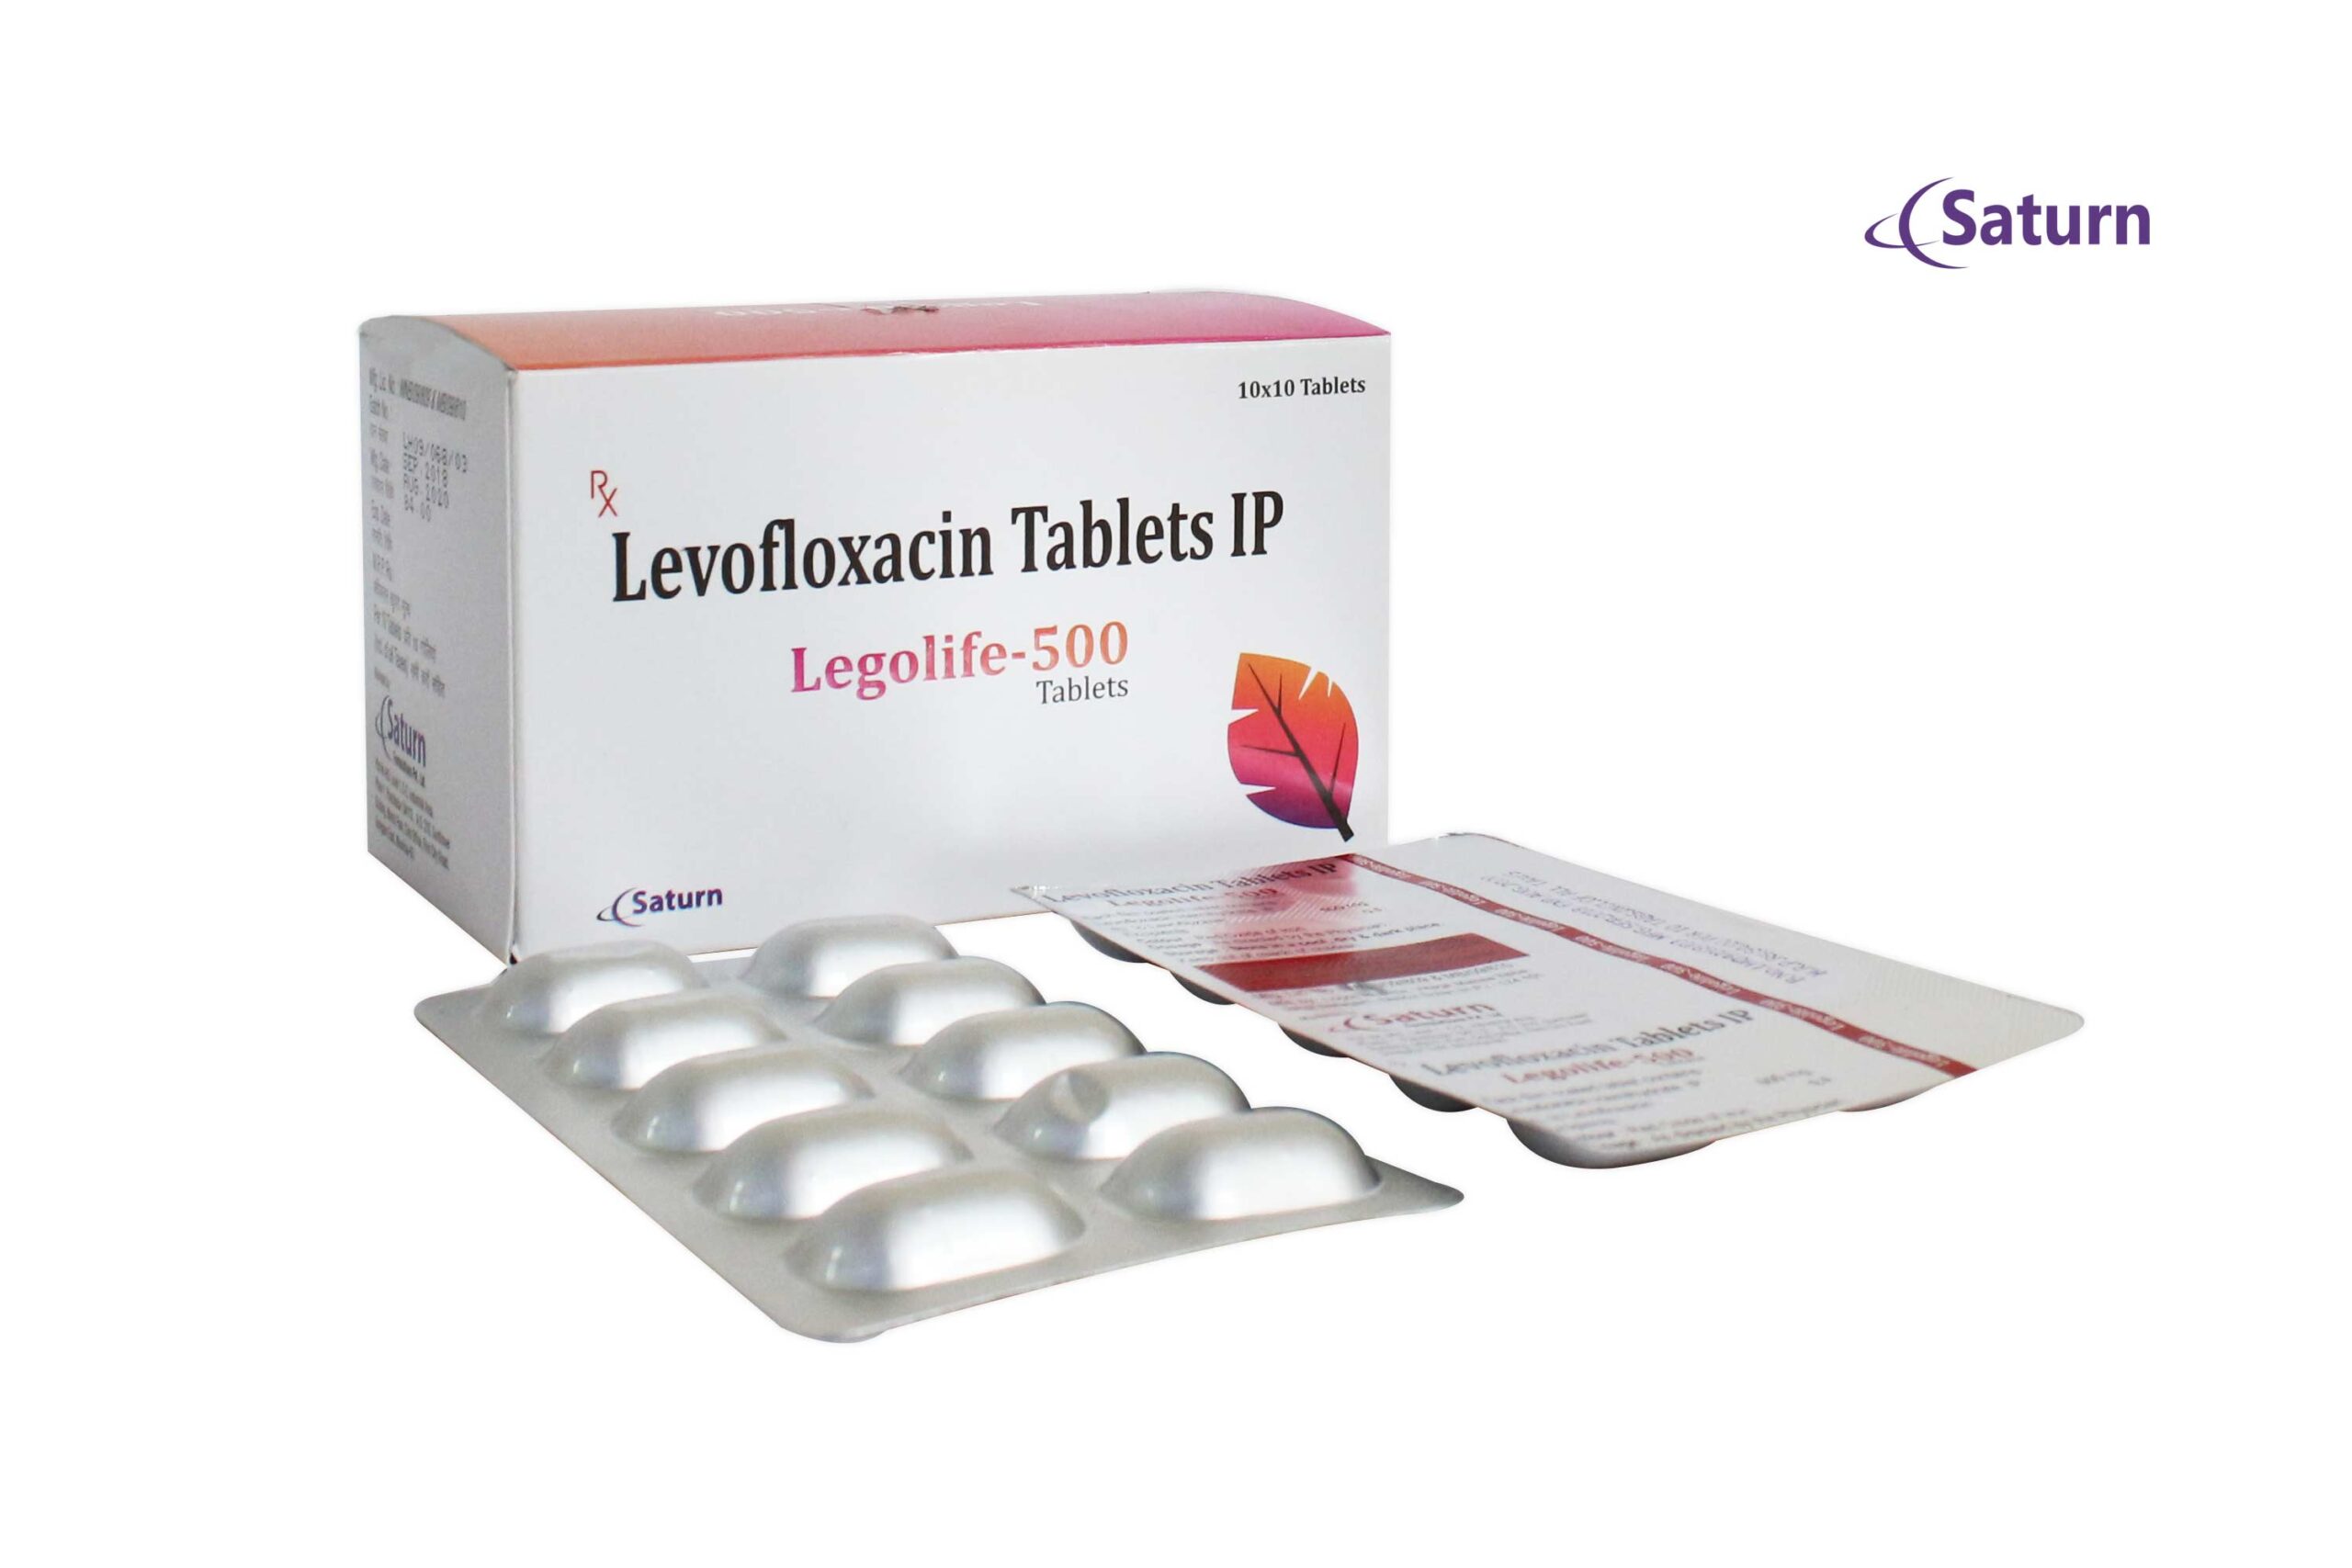 Levofloxacin is an antibiotic used to treat serious infections